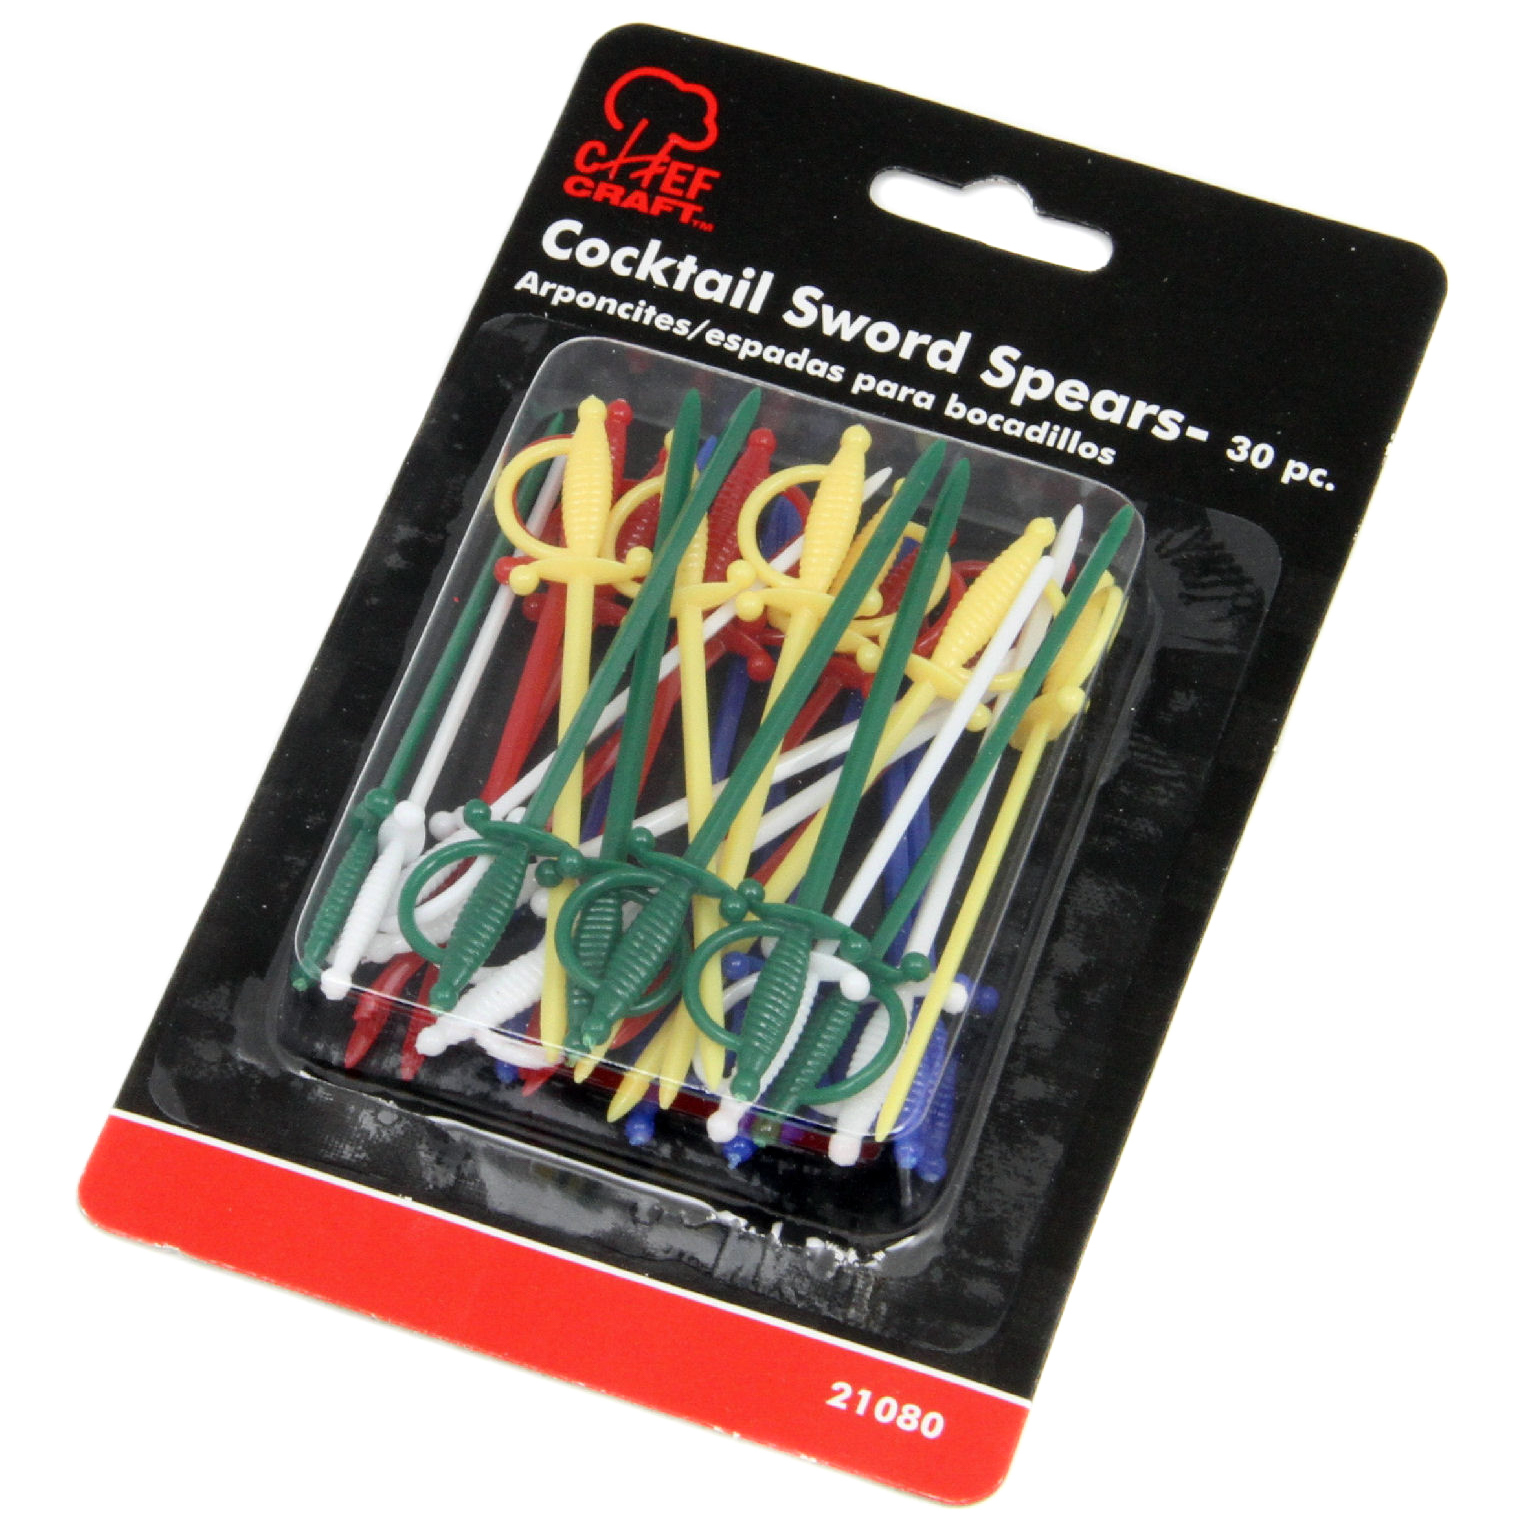 Cocktail SWORD Spears - 30-Pack